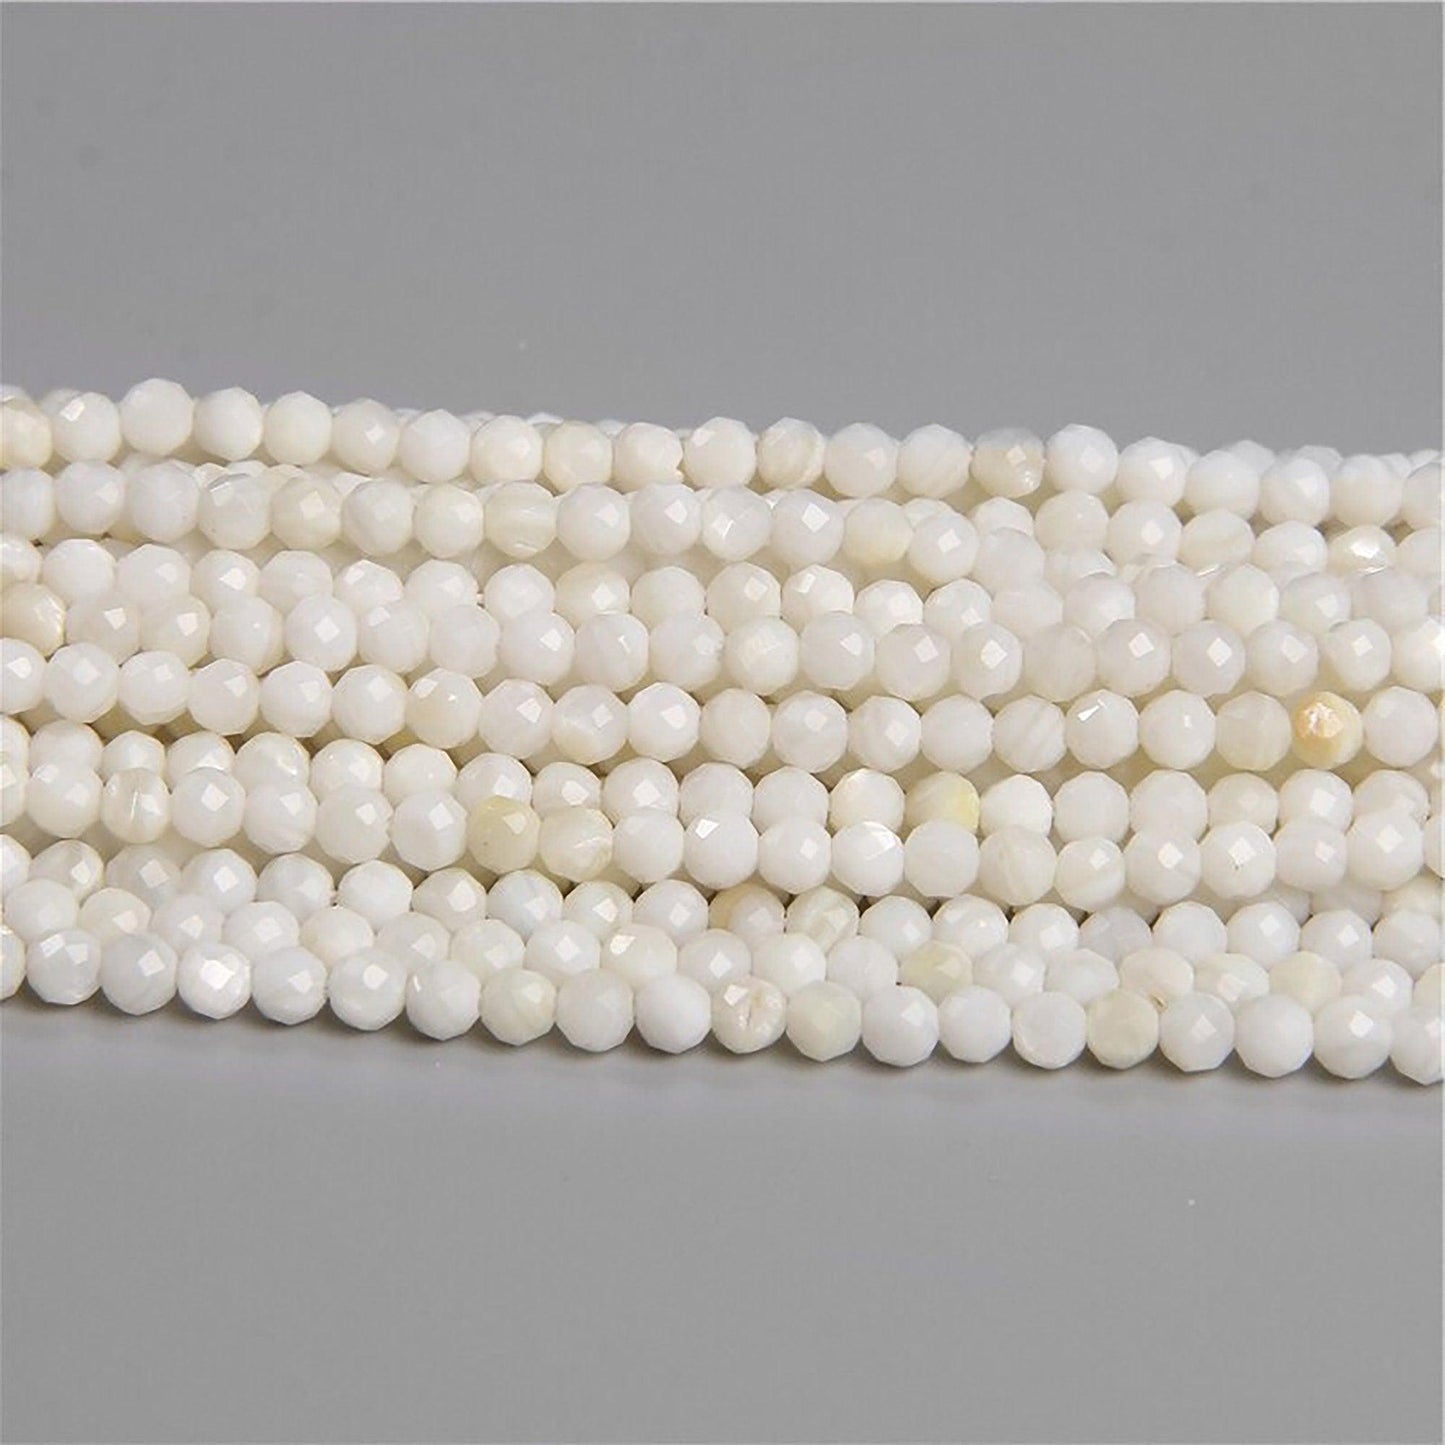 Mother of Pearl Mop shell beads, 2-12mm round beads strand faceted or smooth 